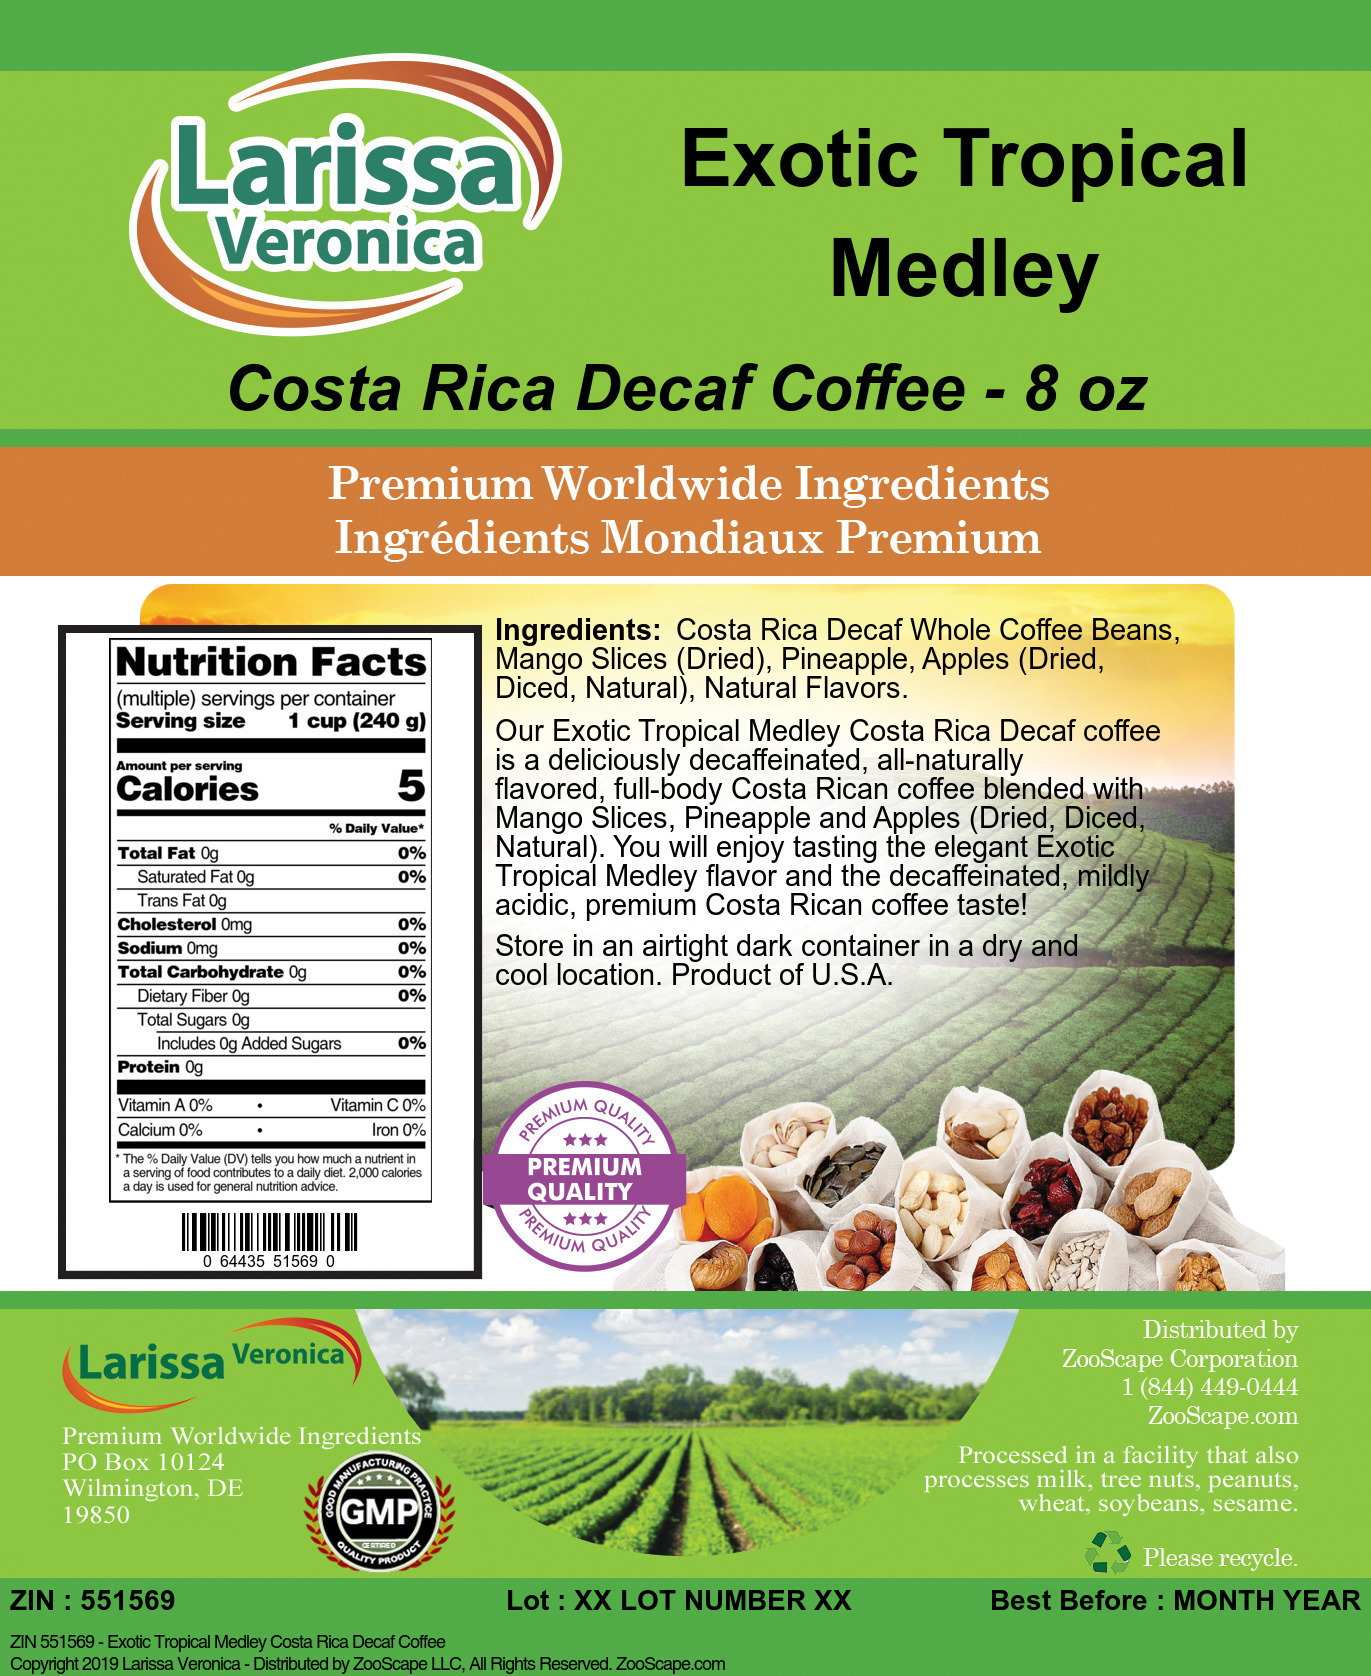 Exotic Tropical Medley Costa Rica Decaf Coffee - Label